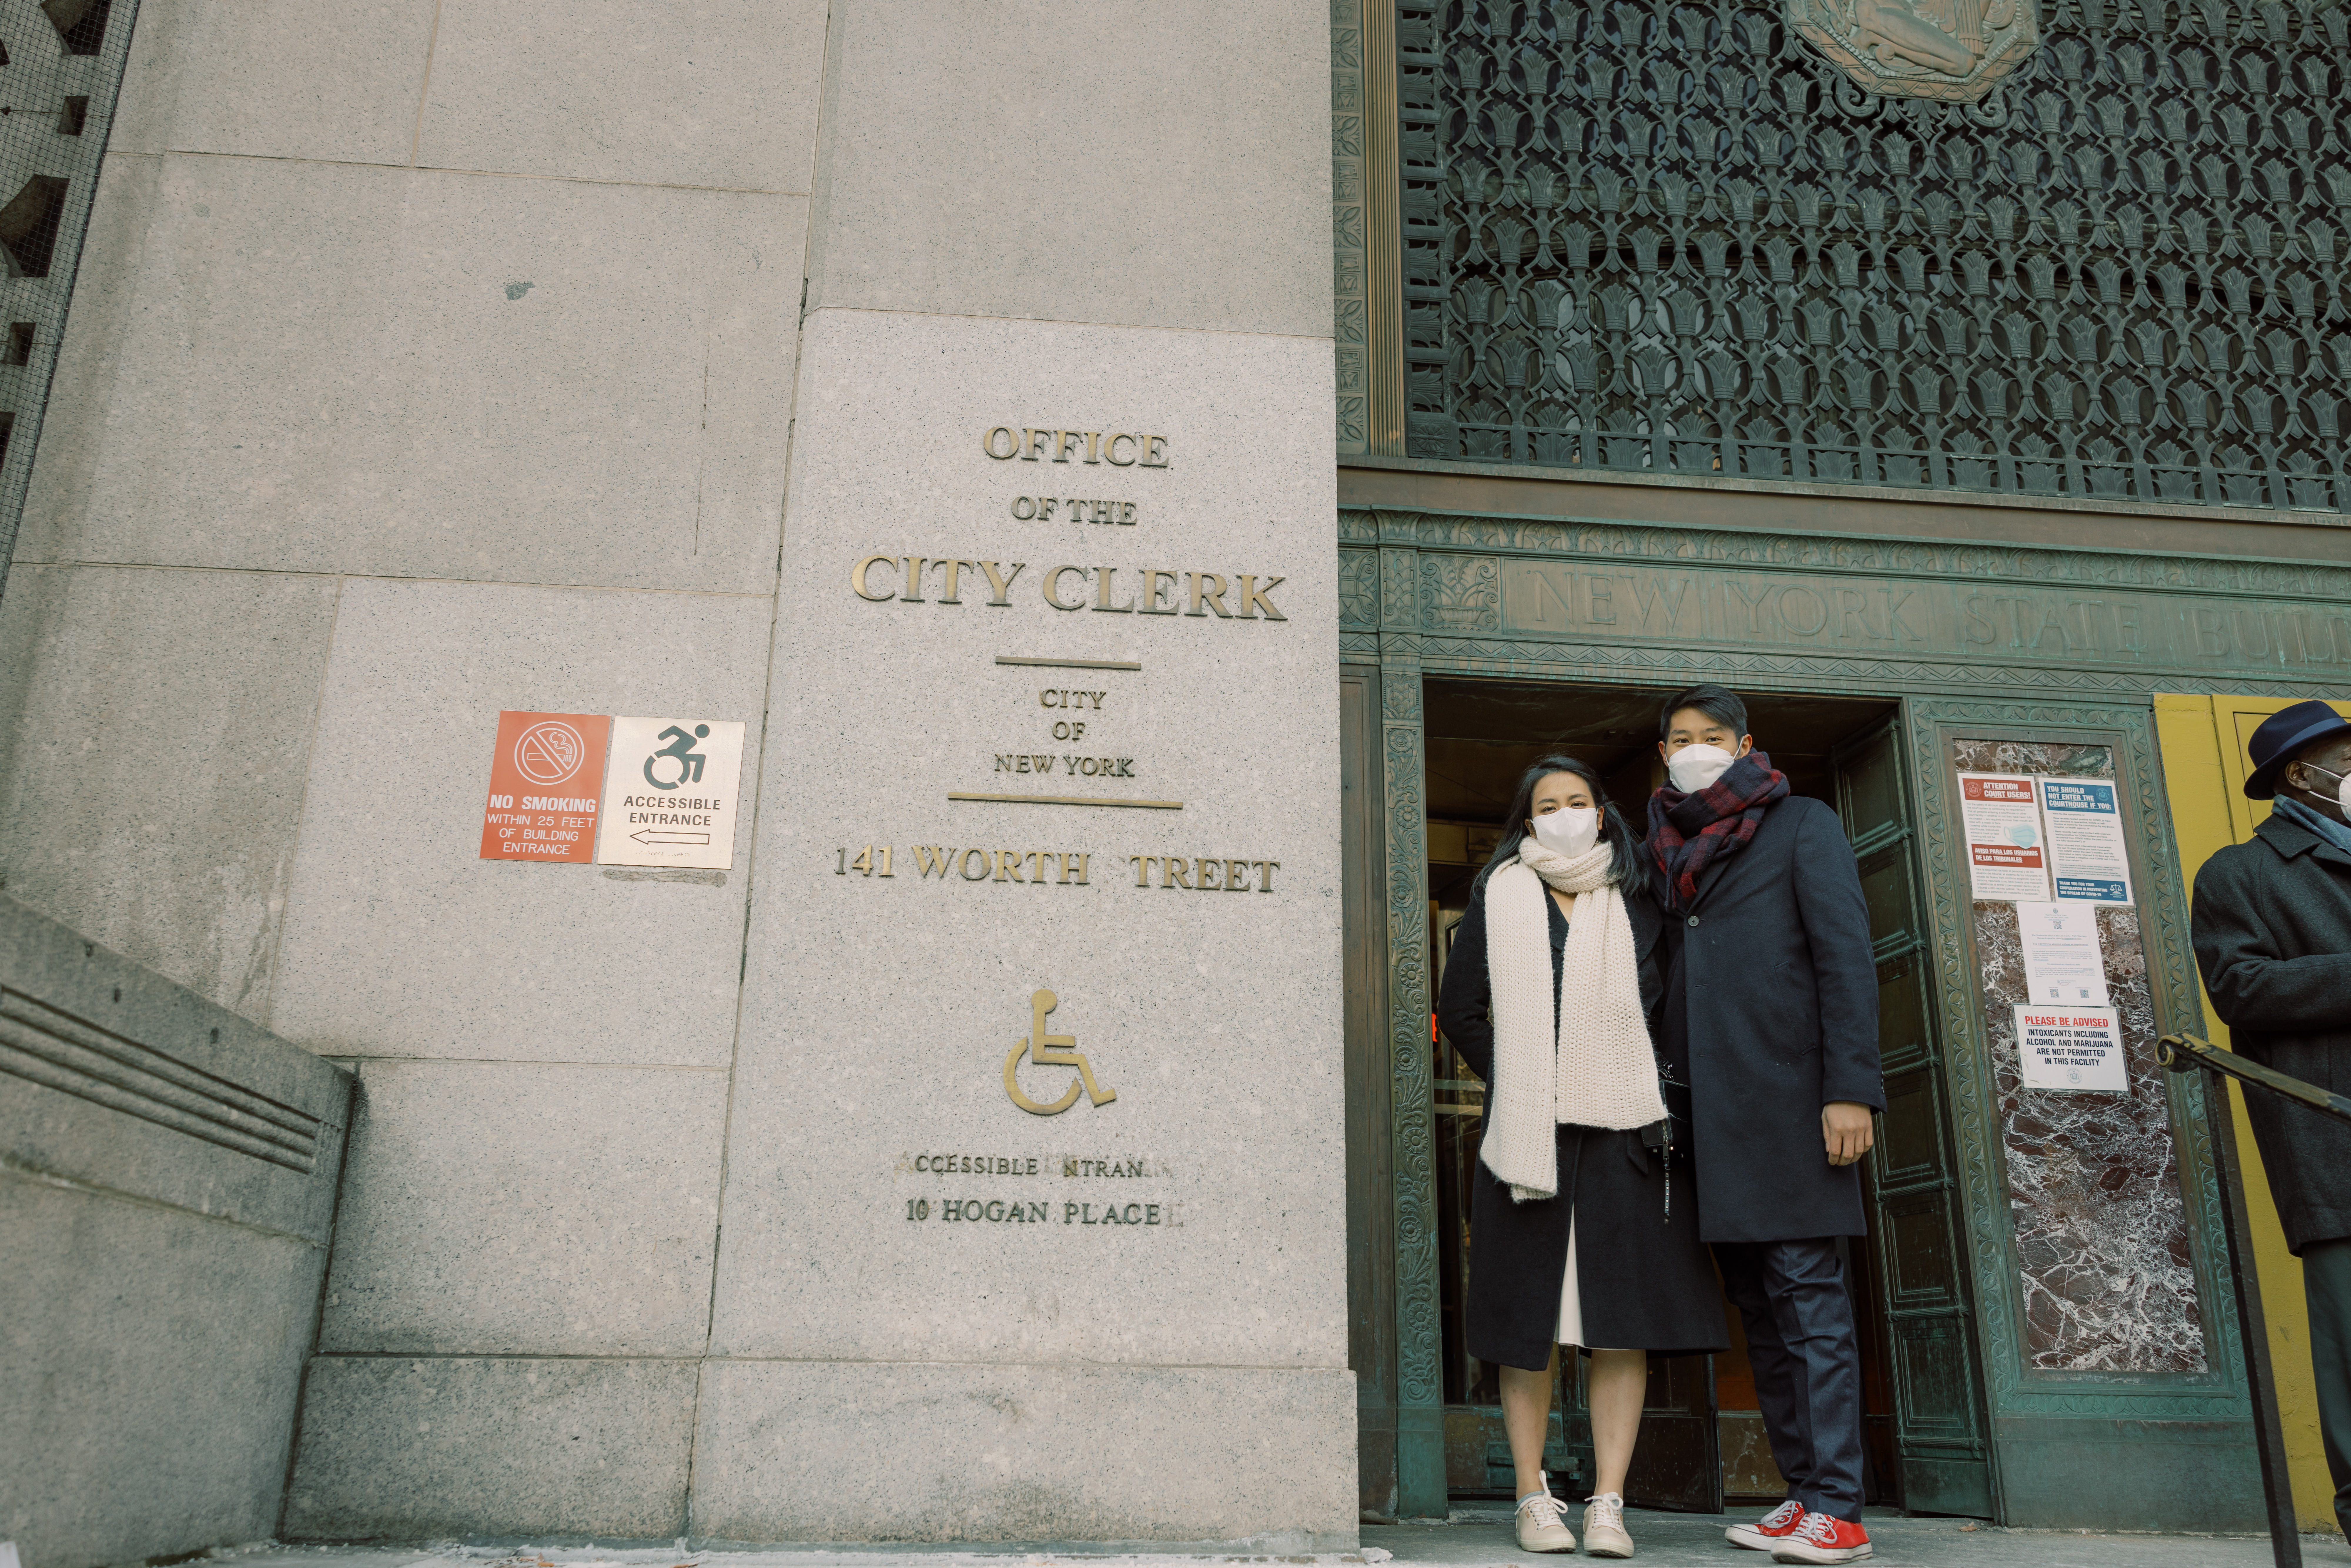 The bride and groom are about to enter the Manhattan City Clerk Office. NYC Christmas elopement image by Jenny Fu Studio